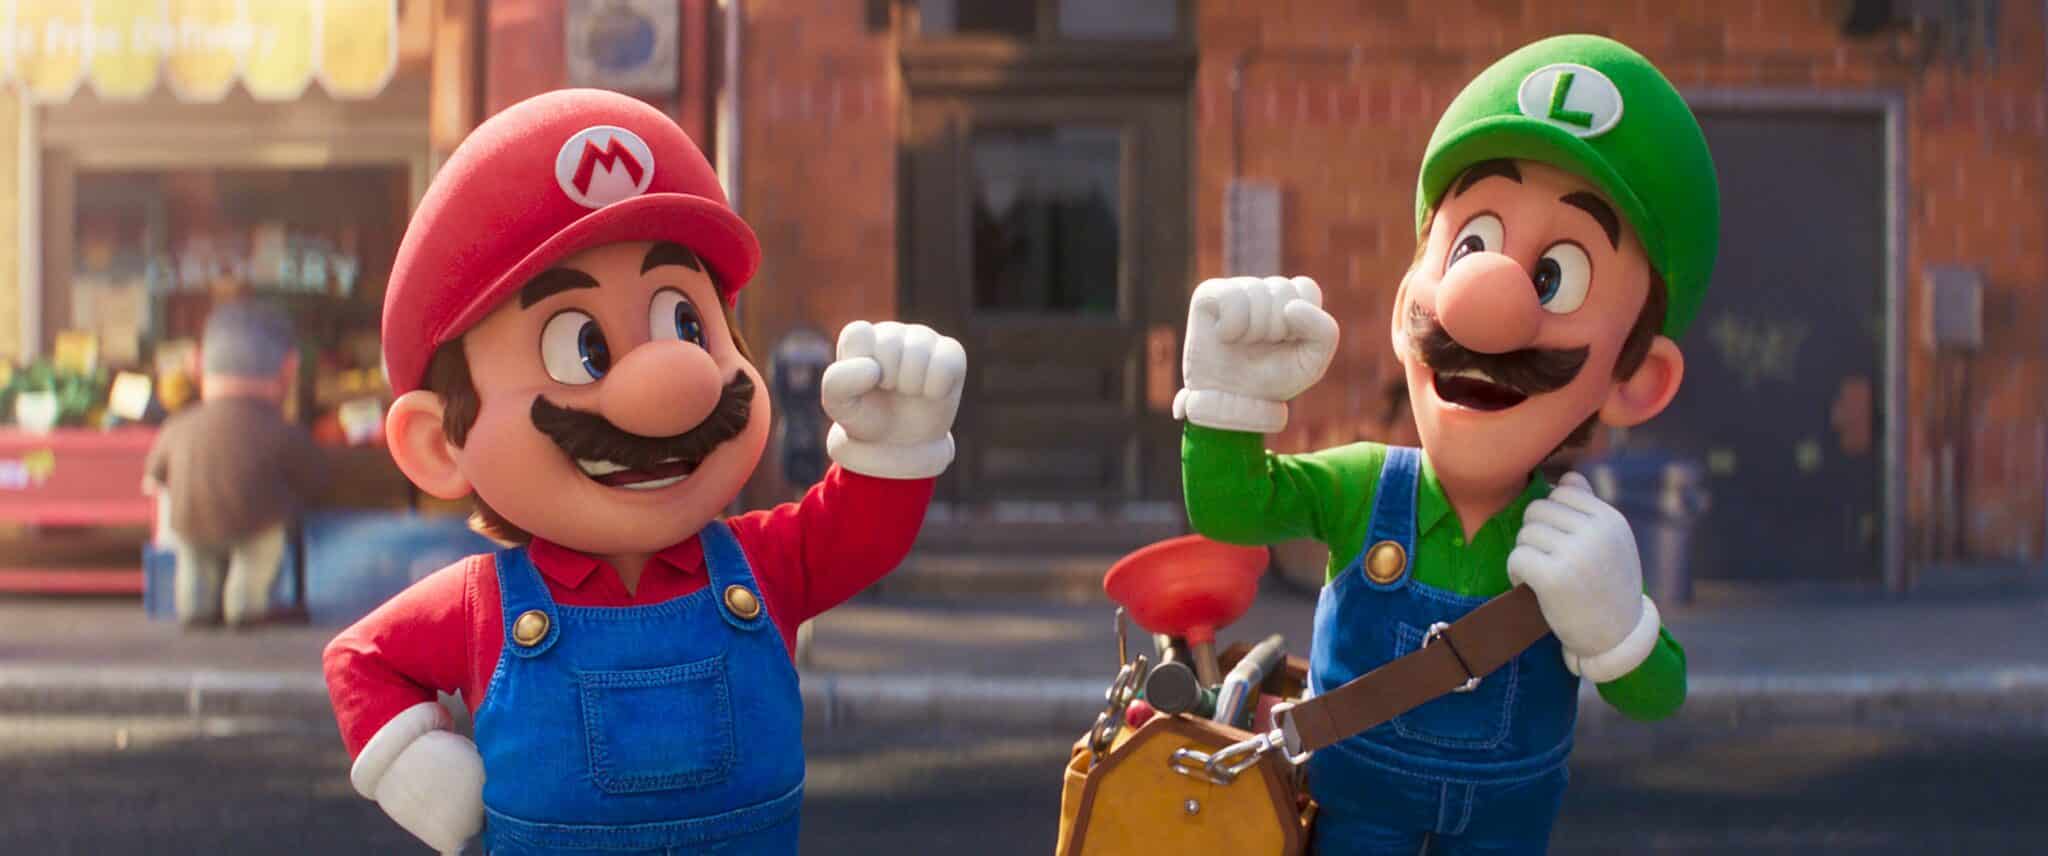 Animated characters Mario, voiced by Chris Pratt, and Luigi, voiced by Charlie Day, appear in “The Super Mario Bros. Movie.” Image: OSV News photo/Universal